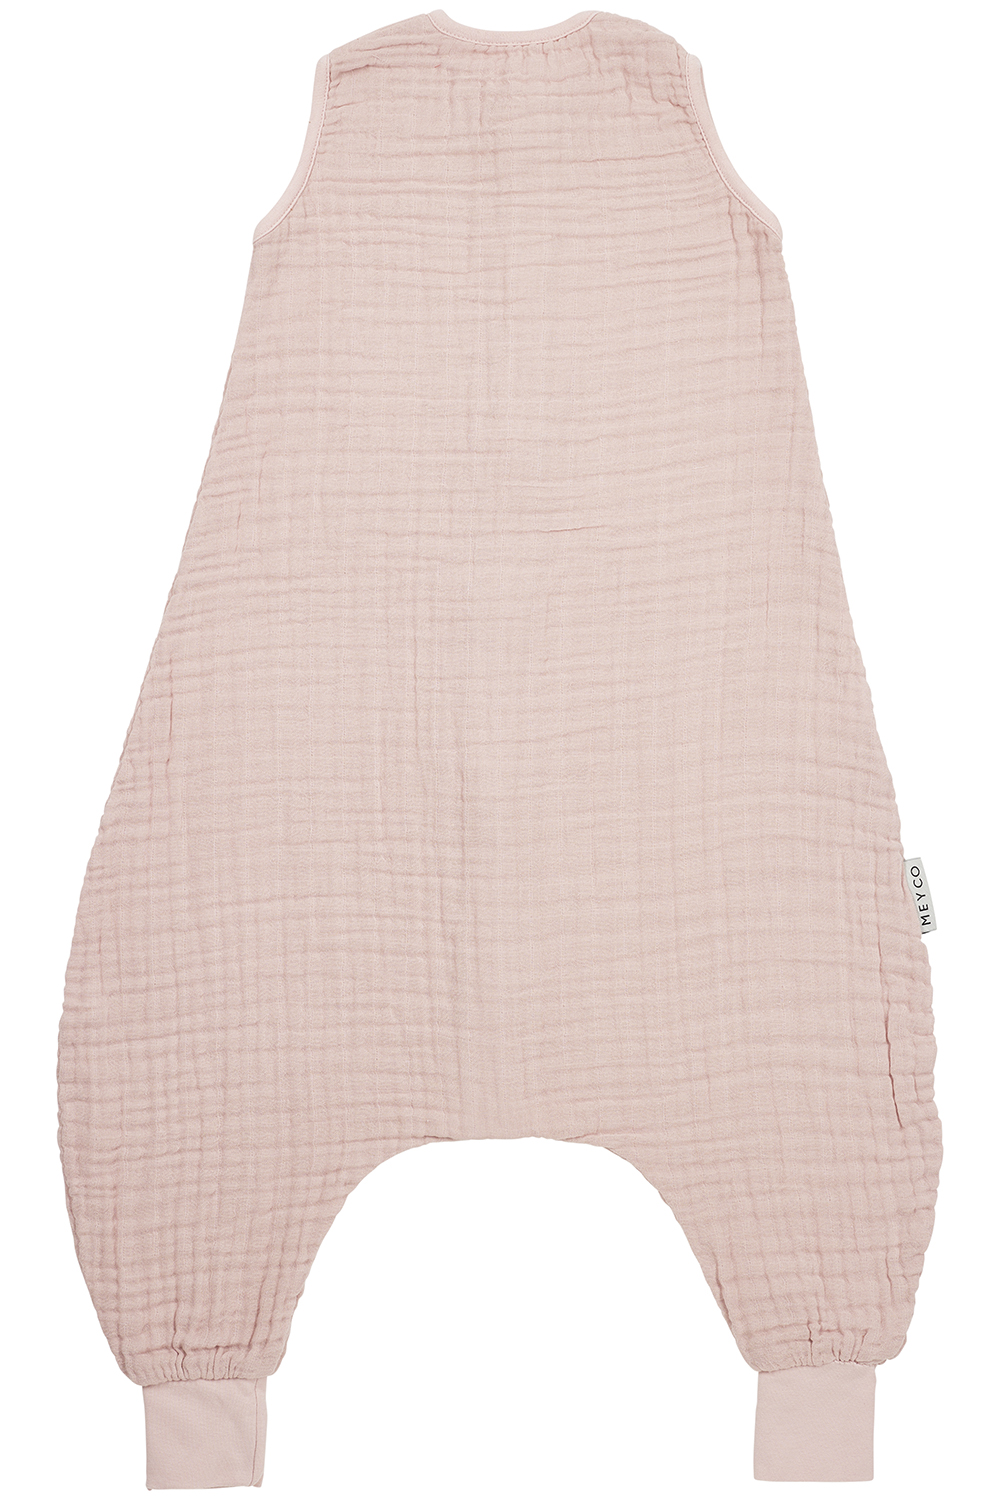 Baby zomer slaapoverall jumper pre-washed hydrofiel Uni - soft pink - 92cm